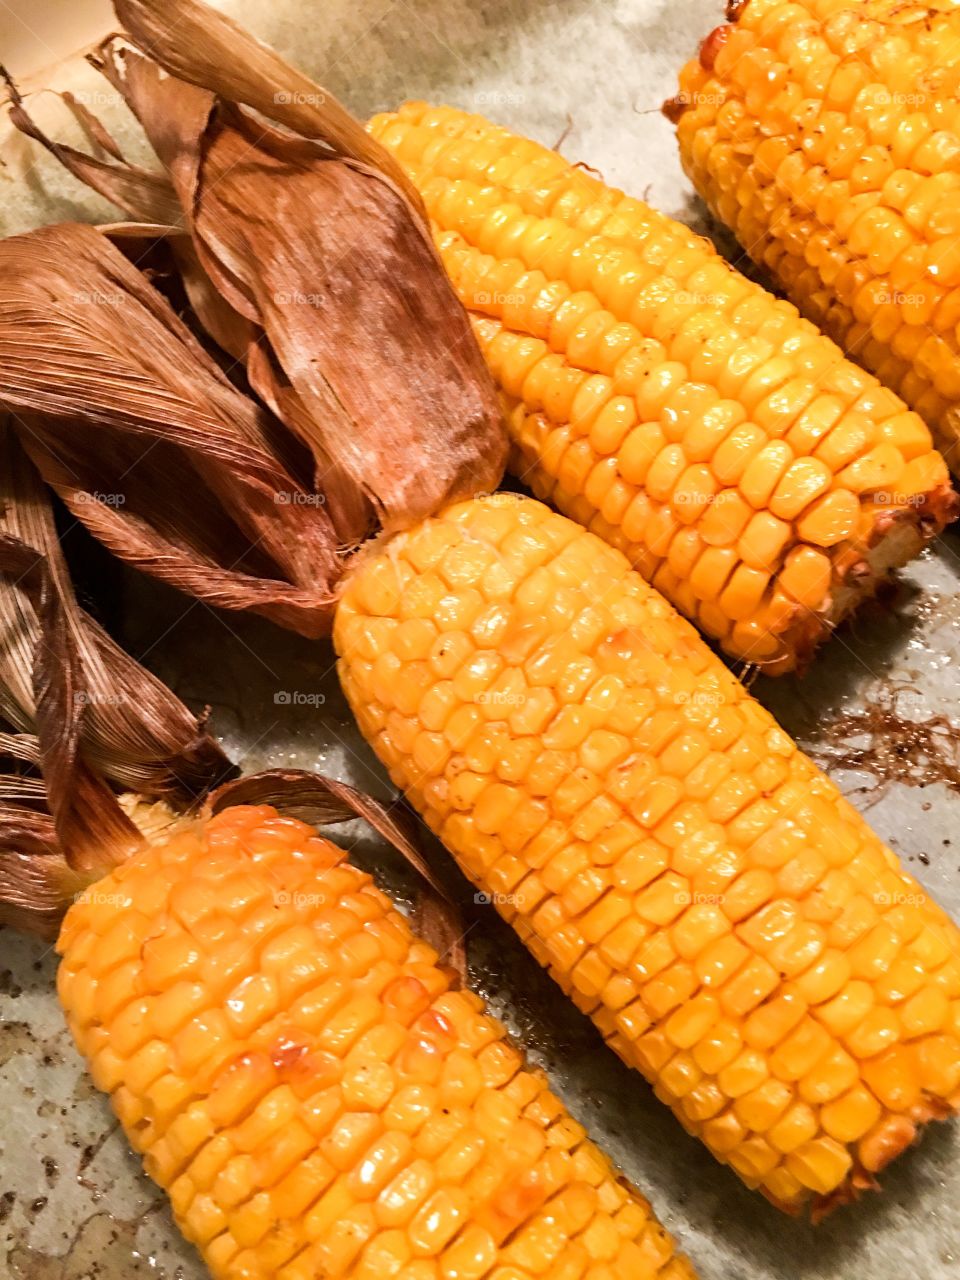 Roasted corn on the carb with the husk husks on